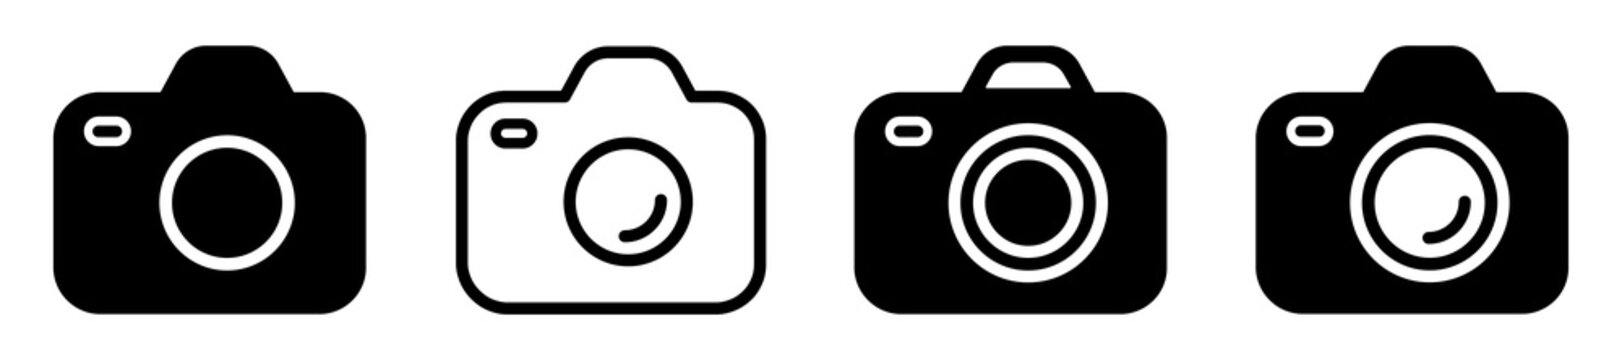 Set of photo camera icons. Photo camera icon for apps and websites. Camera symbols. Photo gadget, snapshot photography sign. Vector.